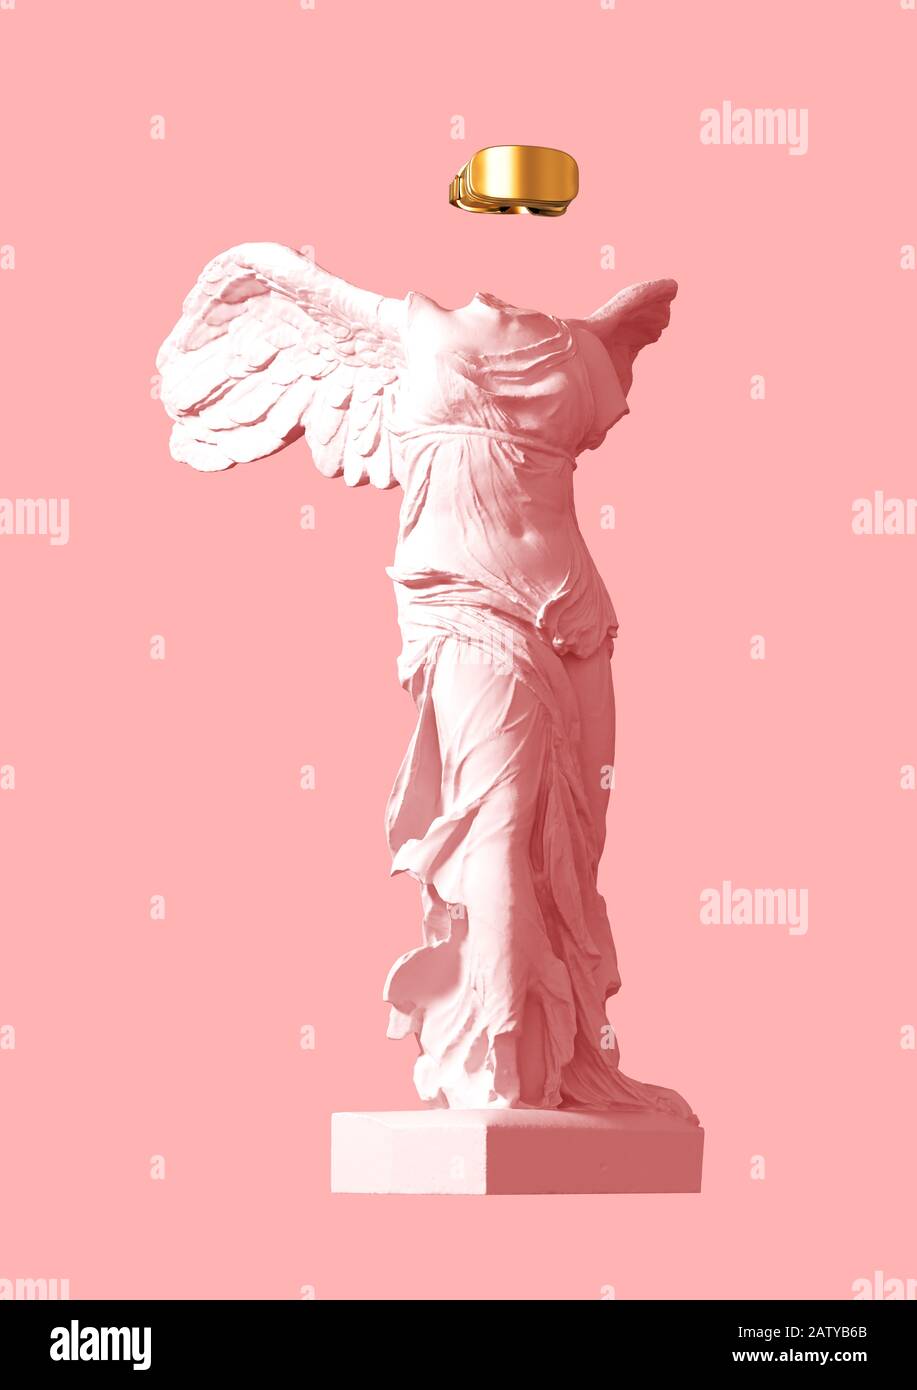 3D Model Of Winged Victory With Golden VR Glasses On Pink Background Stock Photo